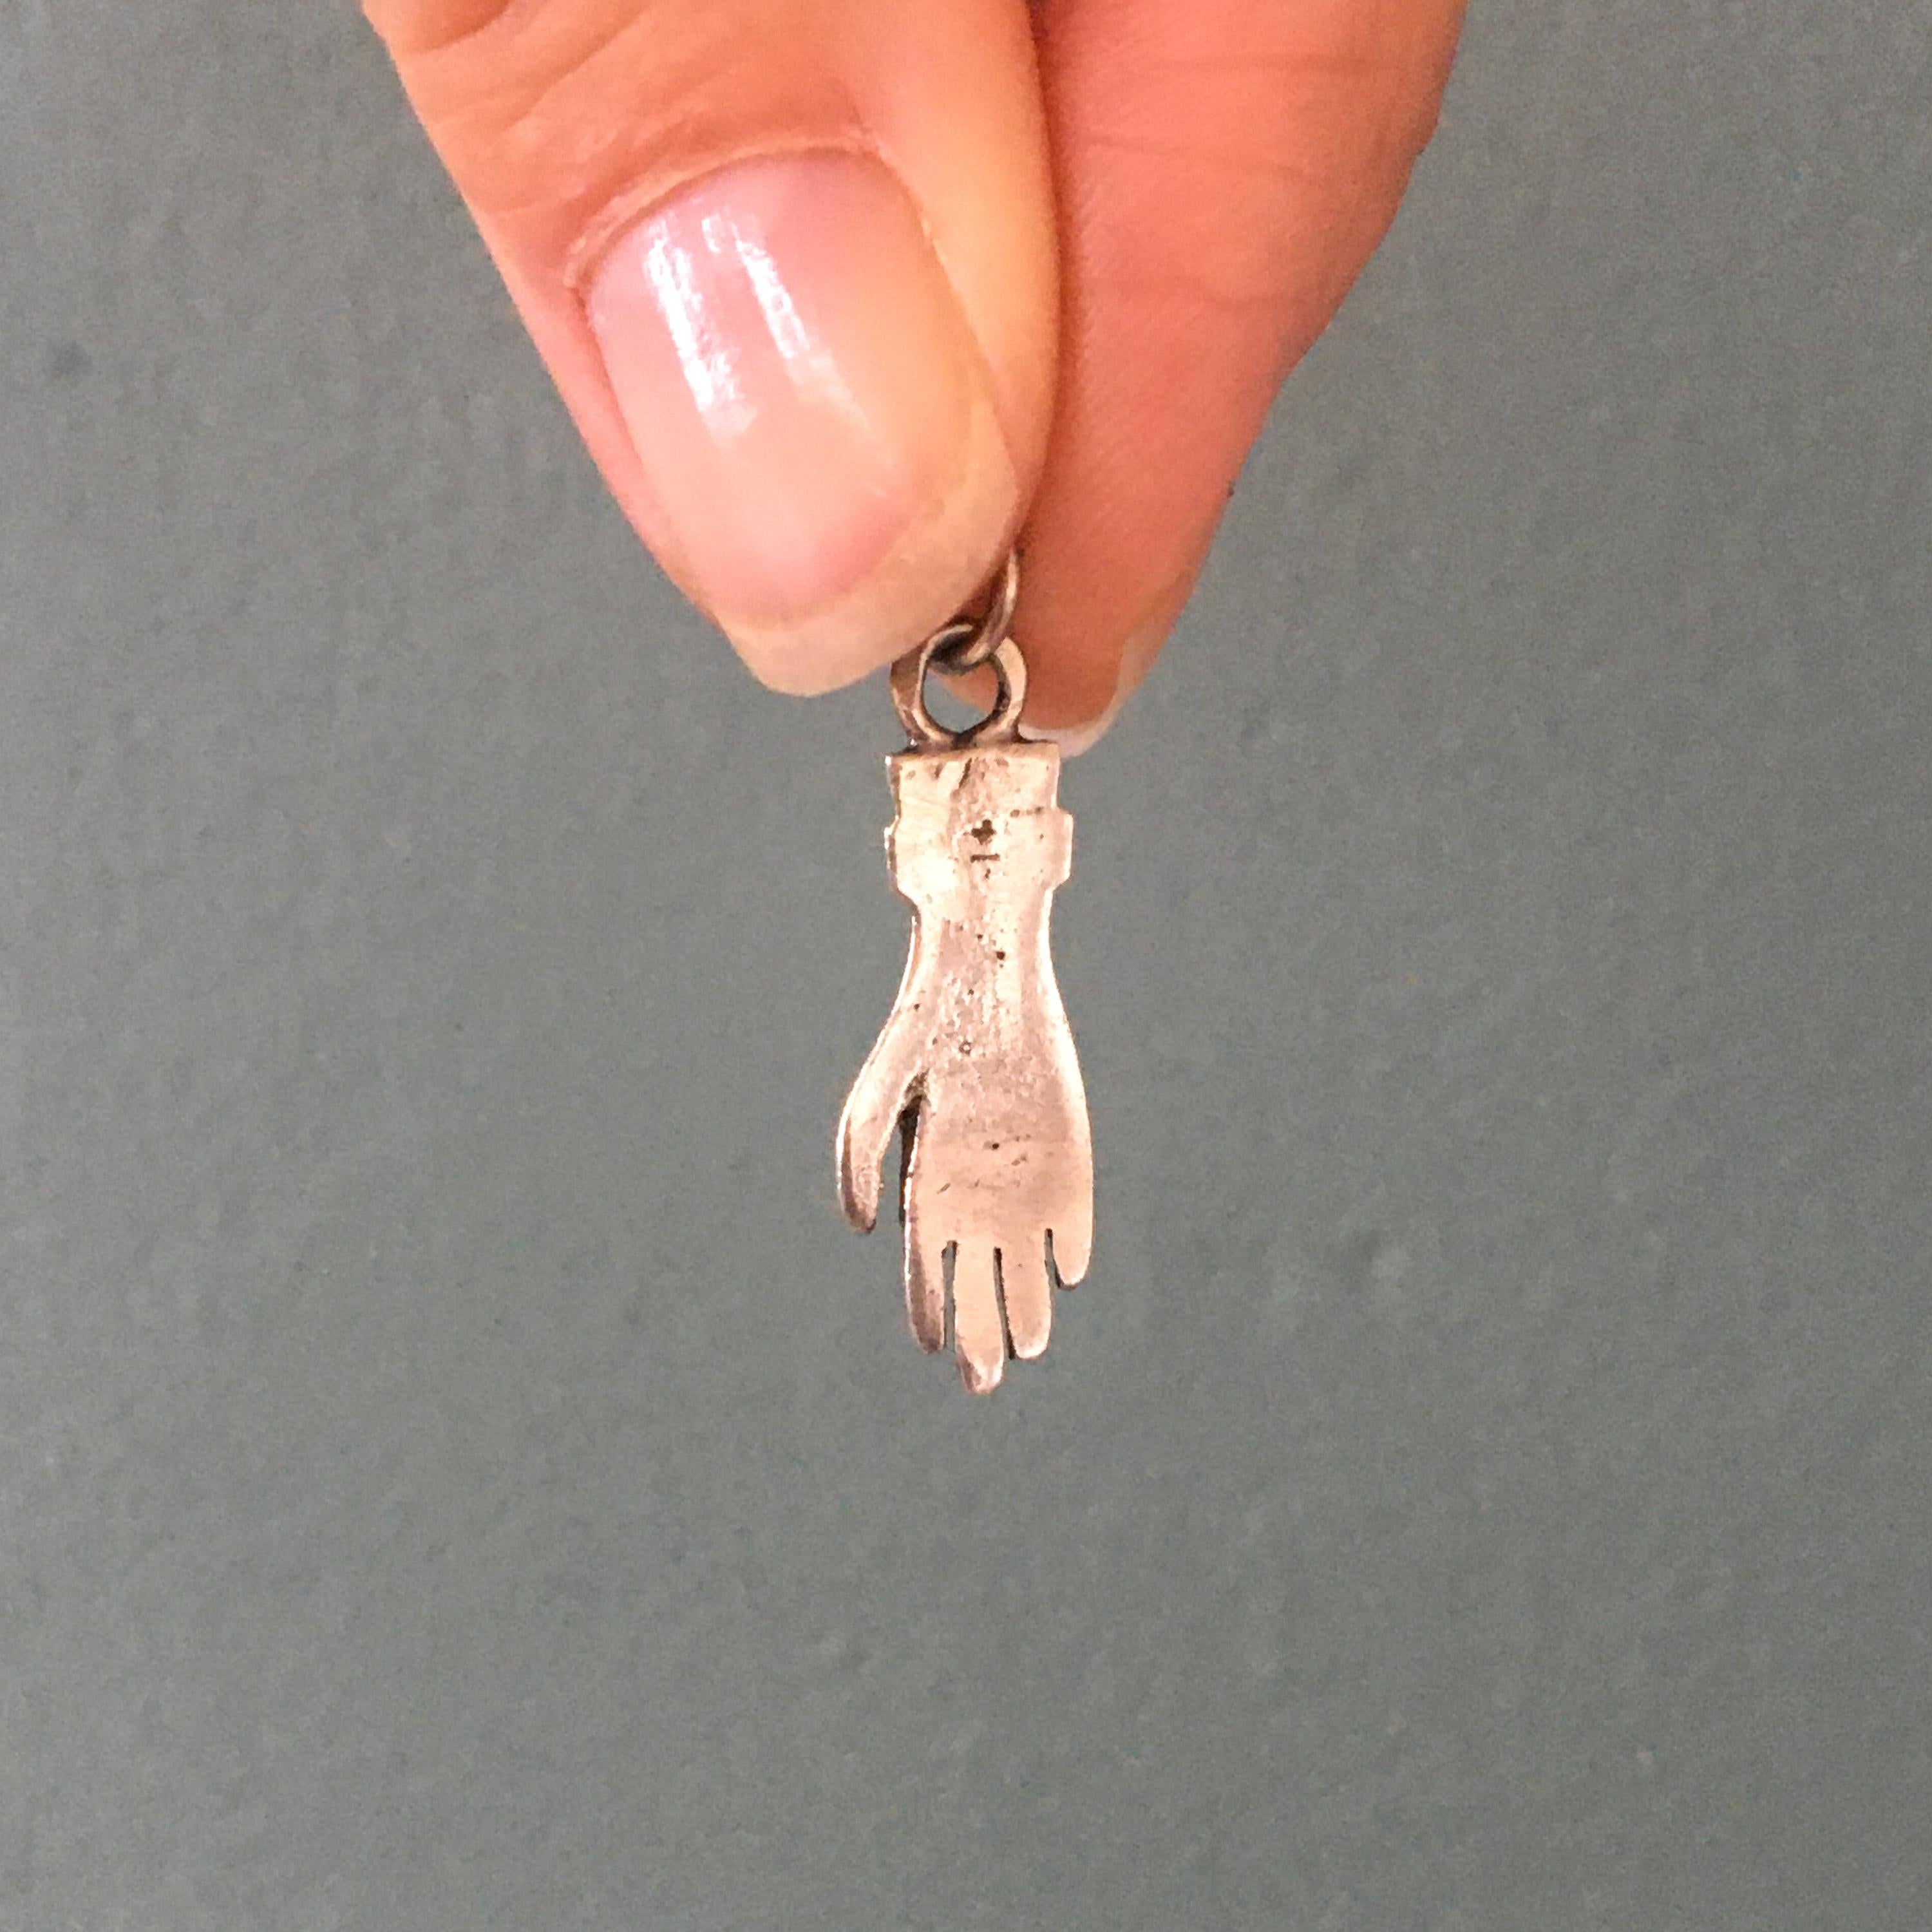 A vintage figa hand charm crafted in sterling silver, 925. The charm is great worn alone or layered with your other favorites. The charm comes without the necklace. 

Collect your own charms as wearable memories that can be added to your necklace,